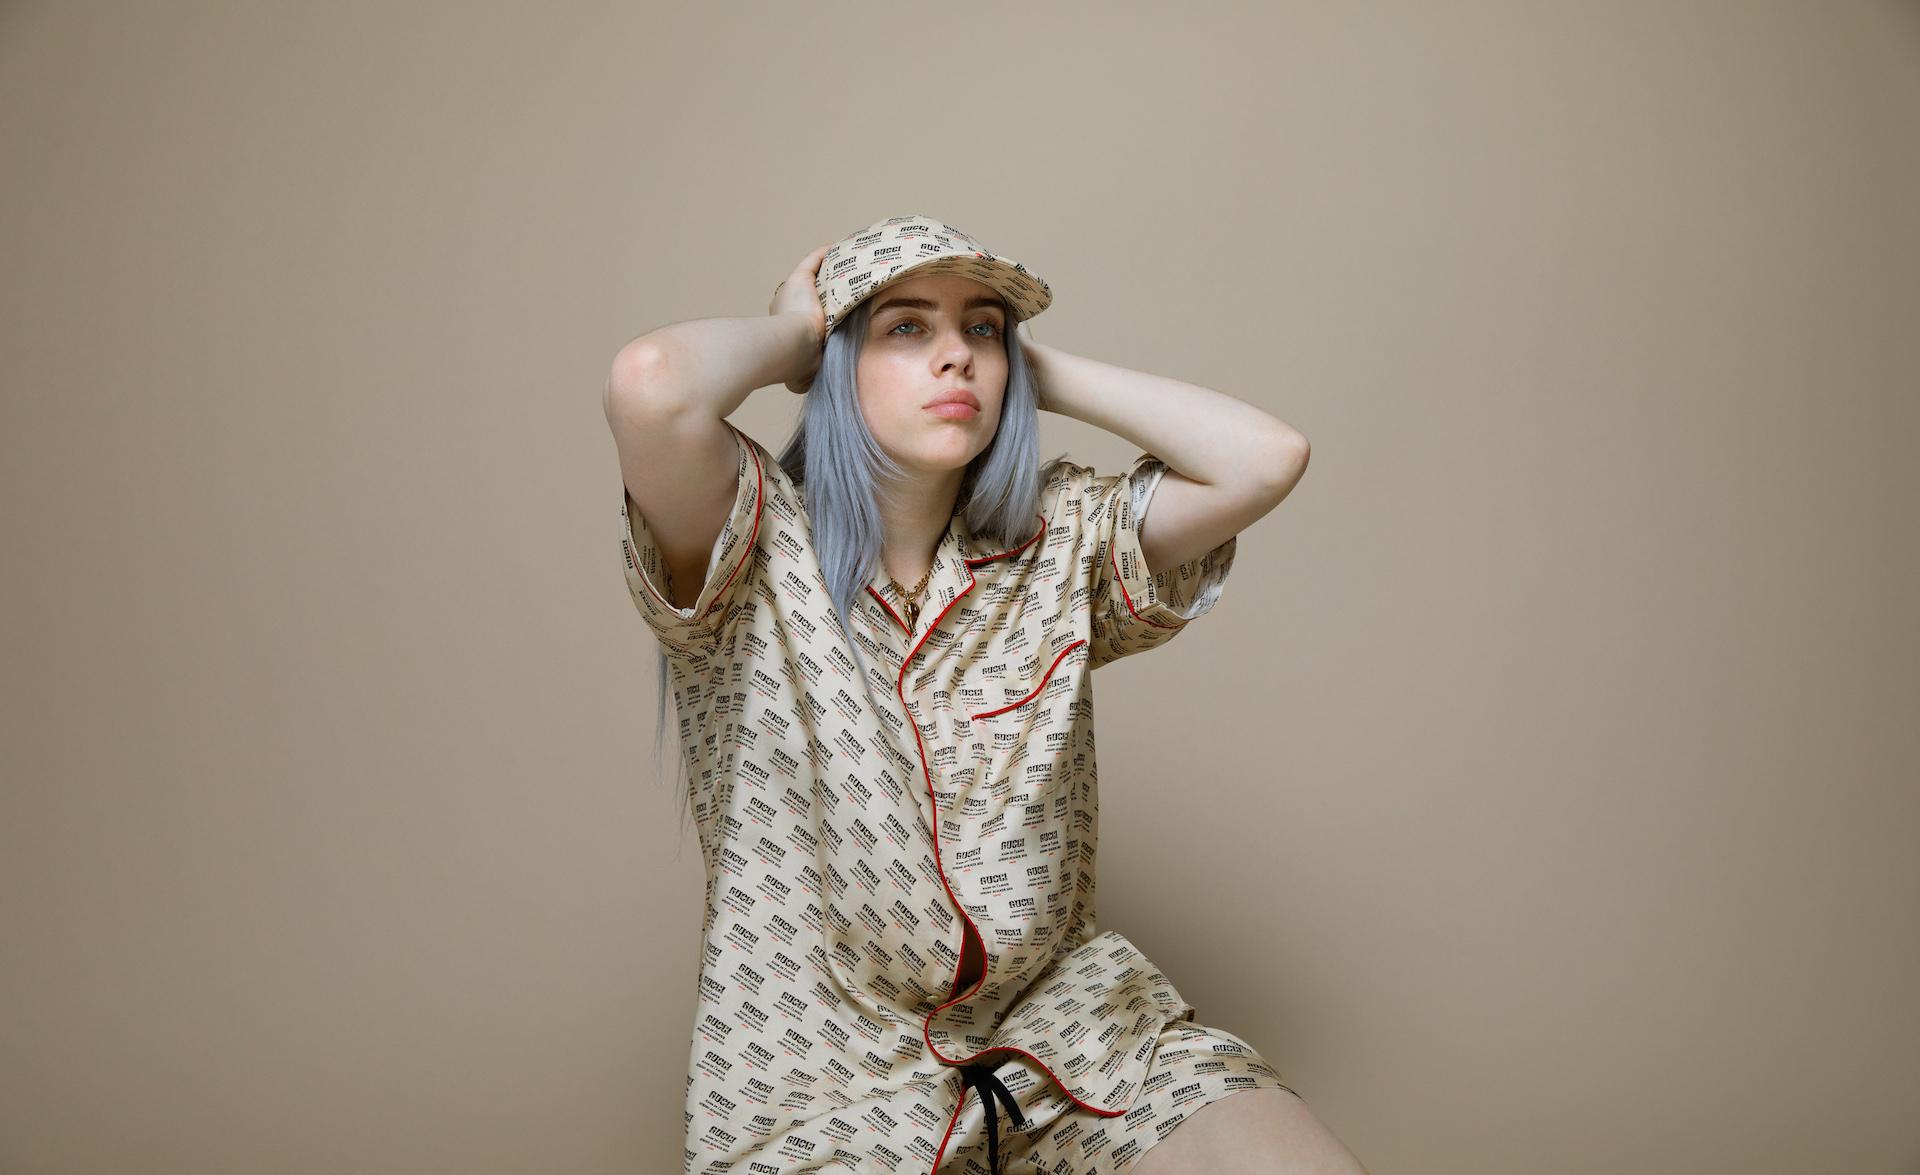 when the party's over', Billie Eilish will turn out the lights